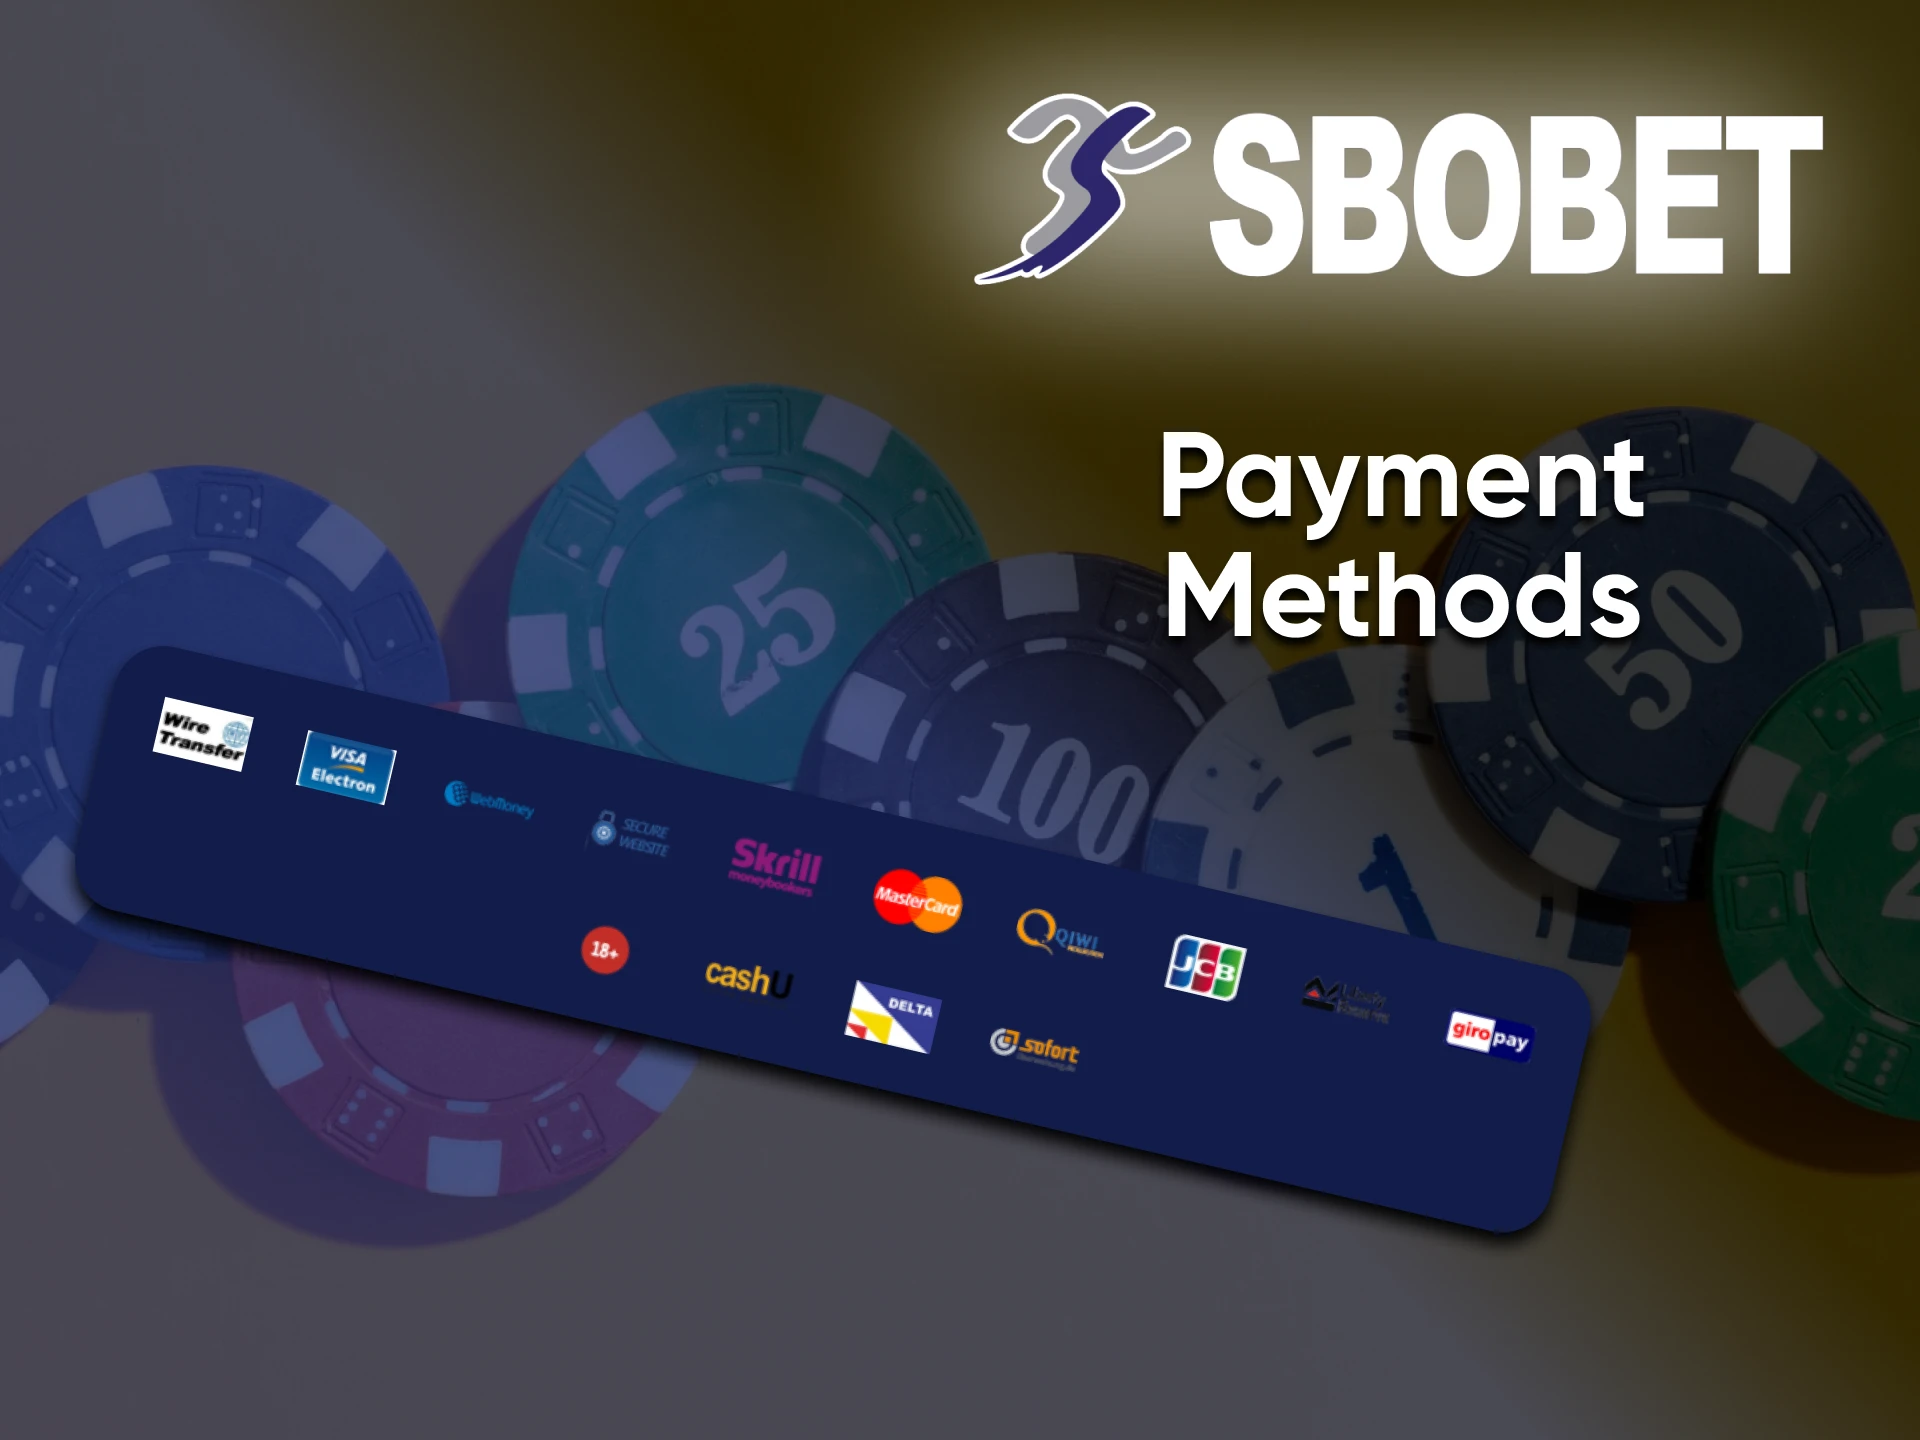 There are many ways to deposit on the Sbobet website.